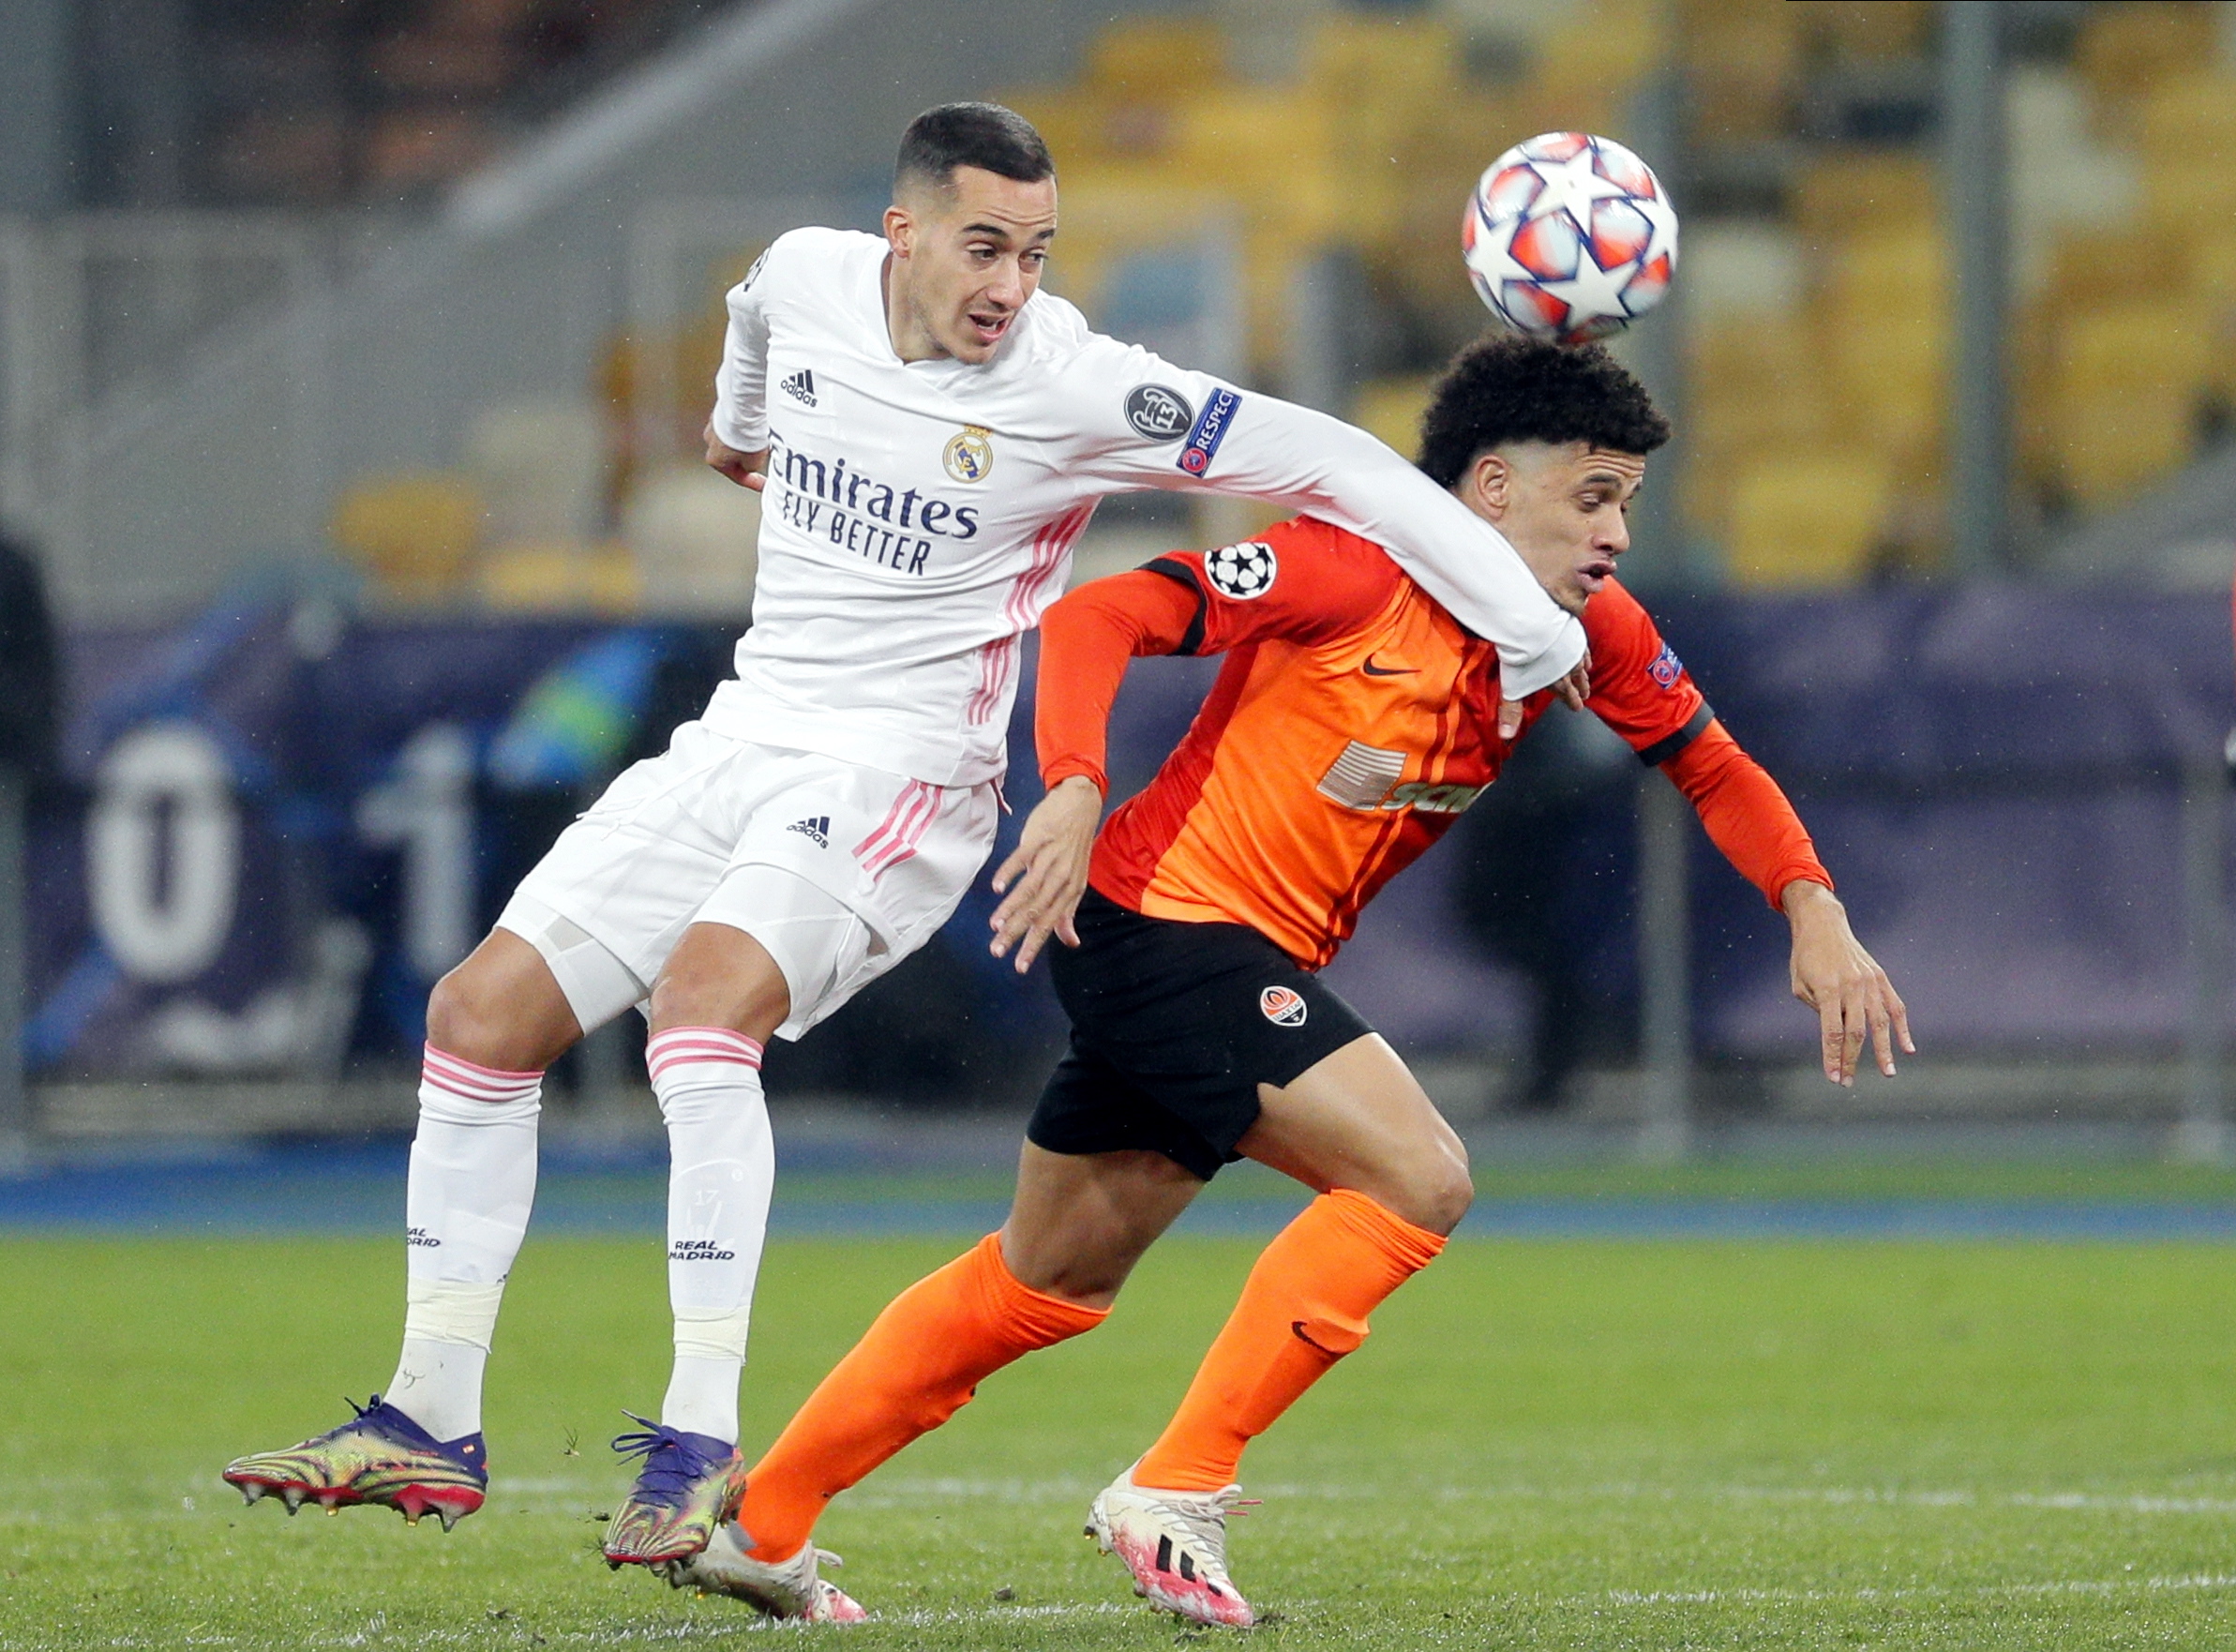 epa08855249 Taison (R) of Shakhtar in action against Lucas Vazquez (L) of Real Madrid during the UEFA Champions League group B match between Shakhtar Donetsk and Real Madrid in Kiev, Ukraine, 01 December 2020.  EPA/Sergey Dolzhenko